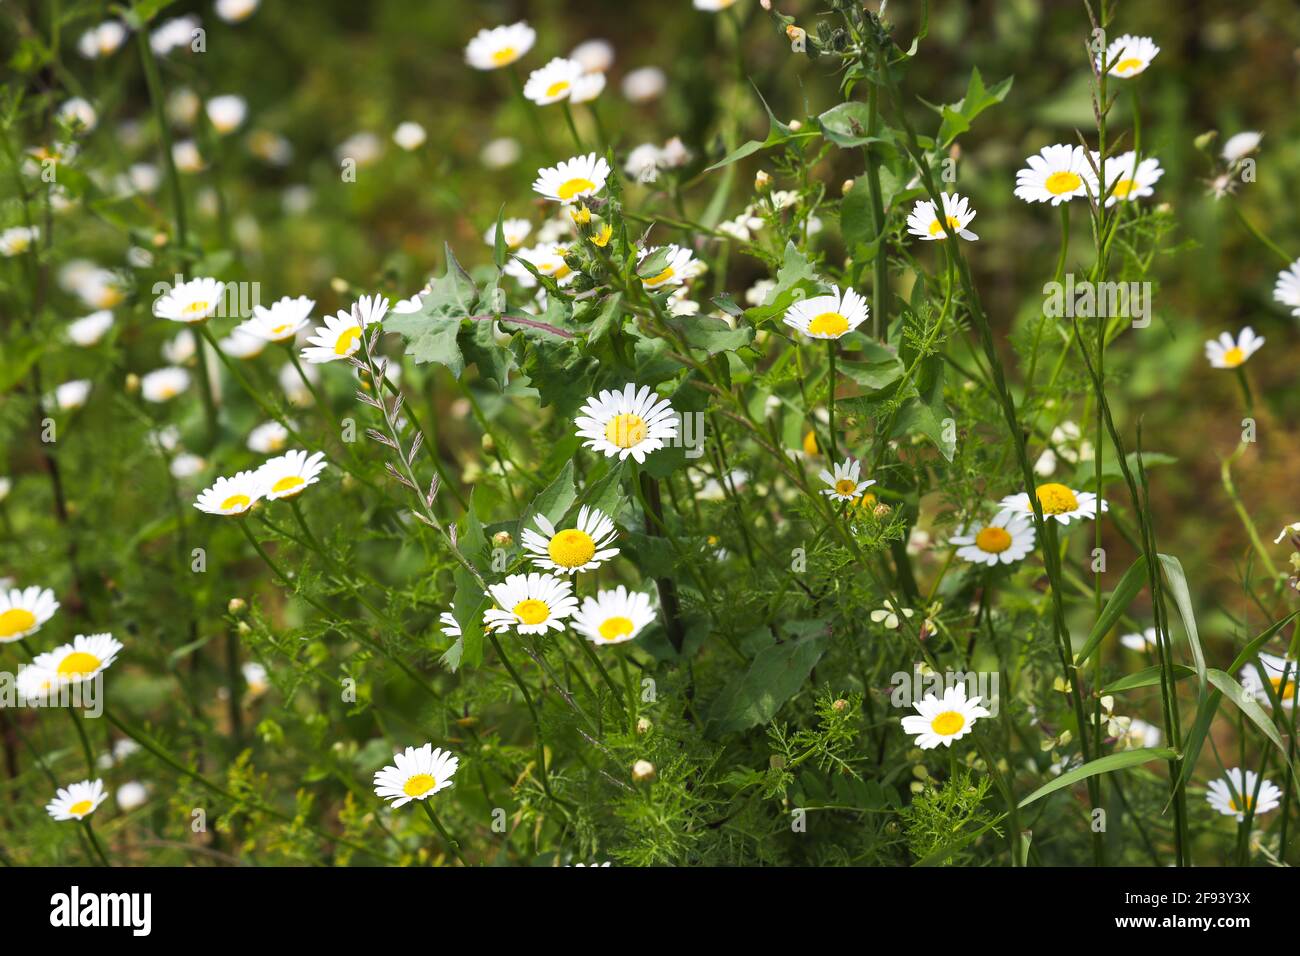 Daisy flower on green meadow, Cheerful Spring Colors. Copy Space, Seasonal Nature Concept Stock Photo